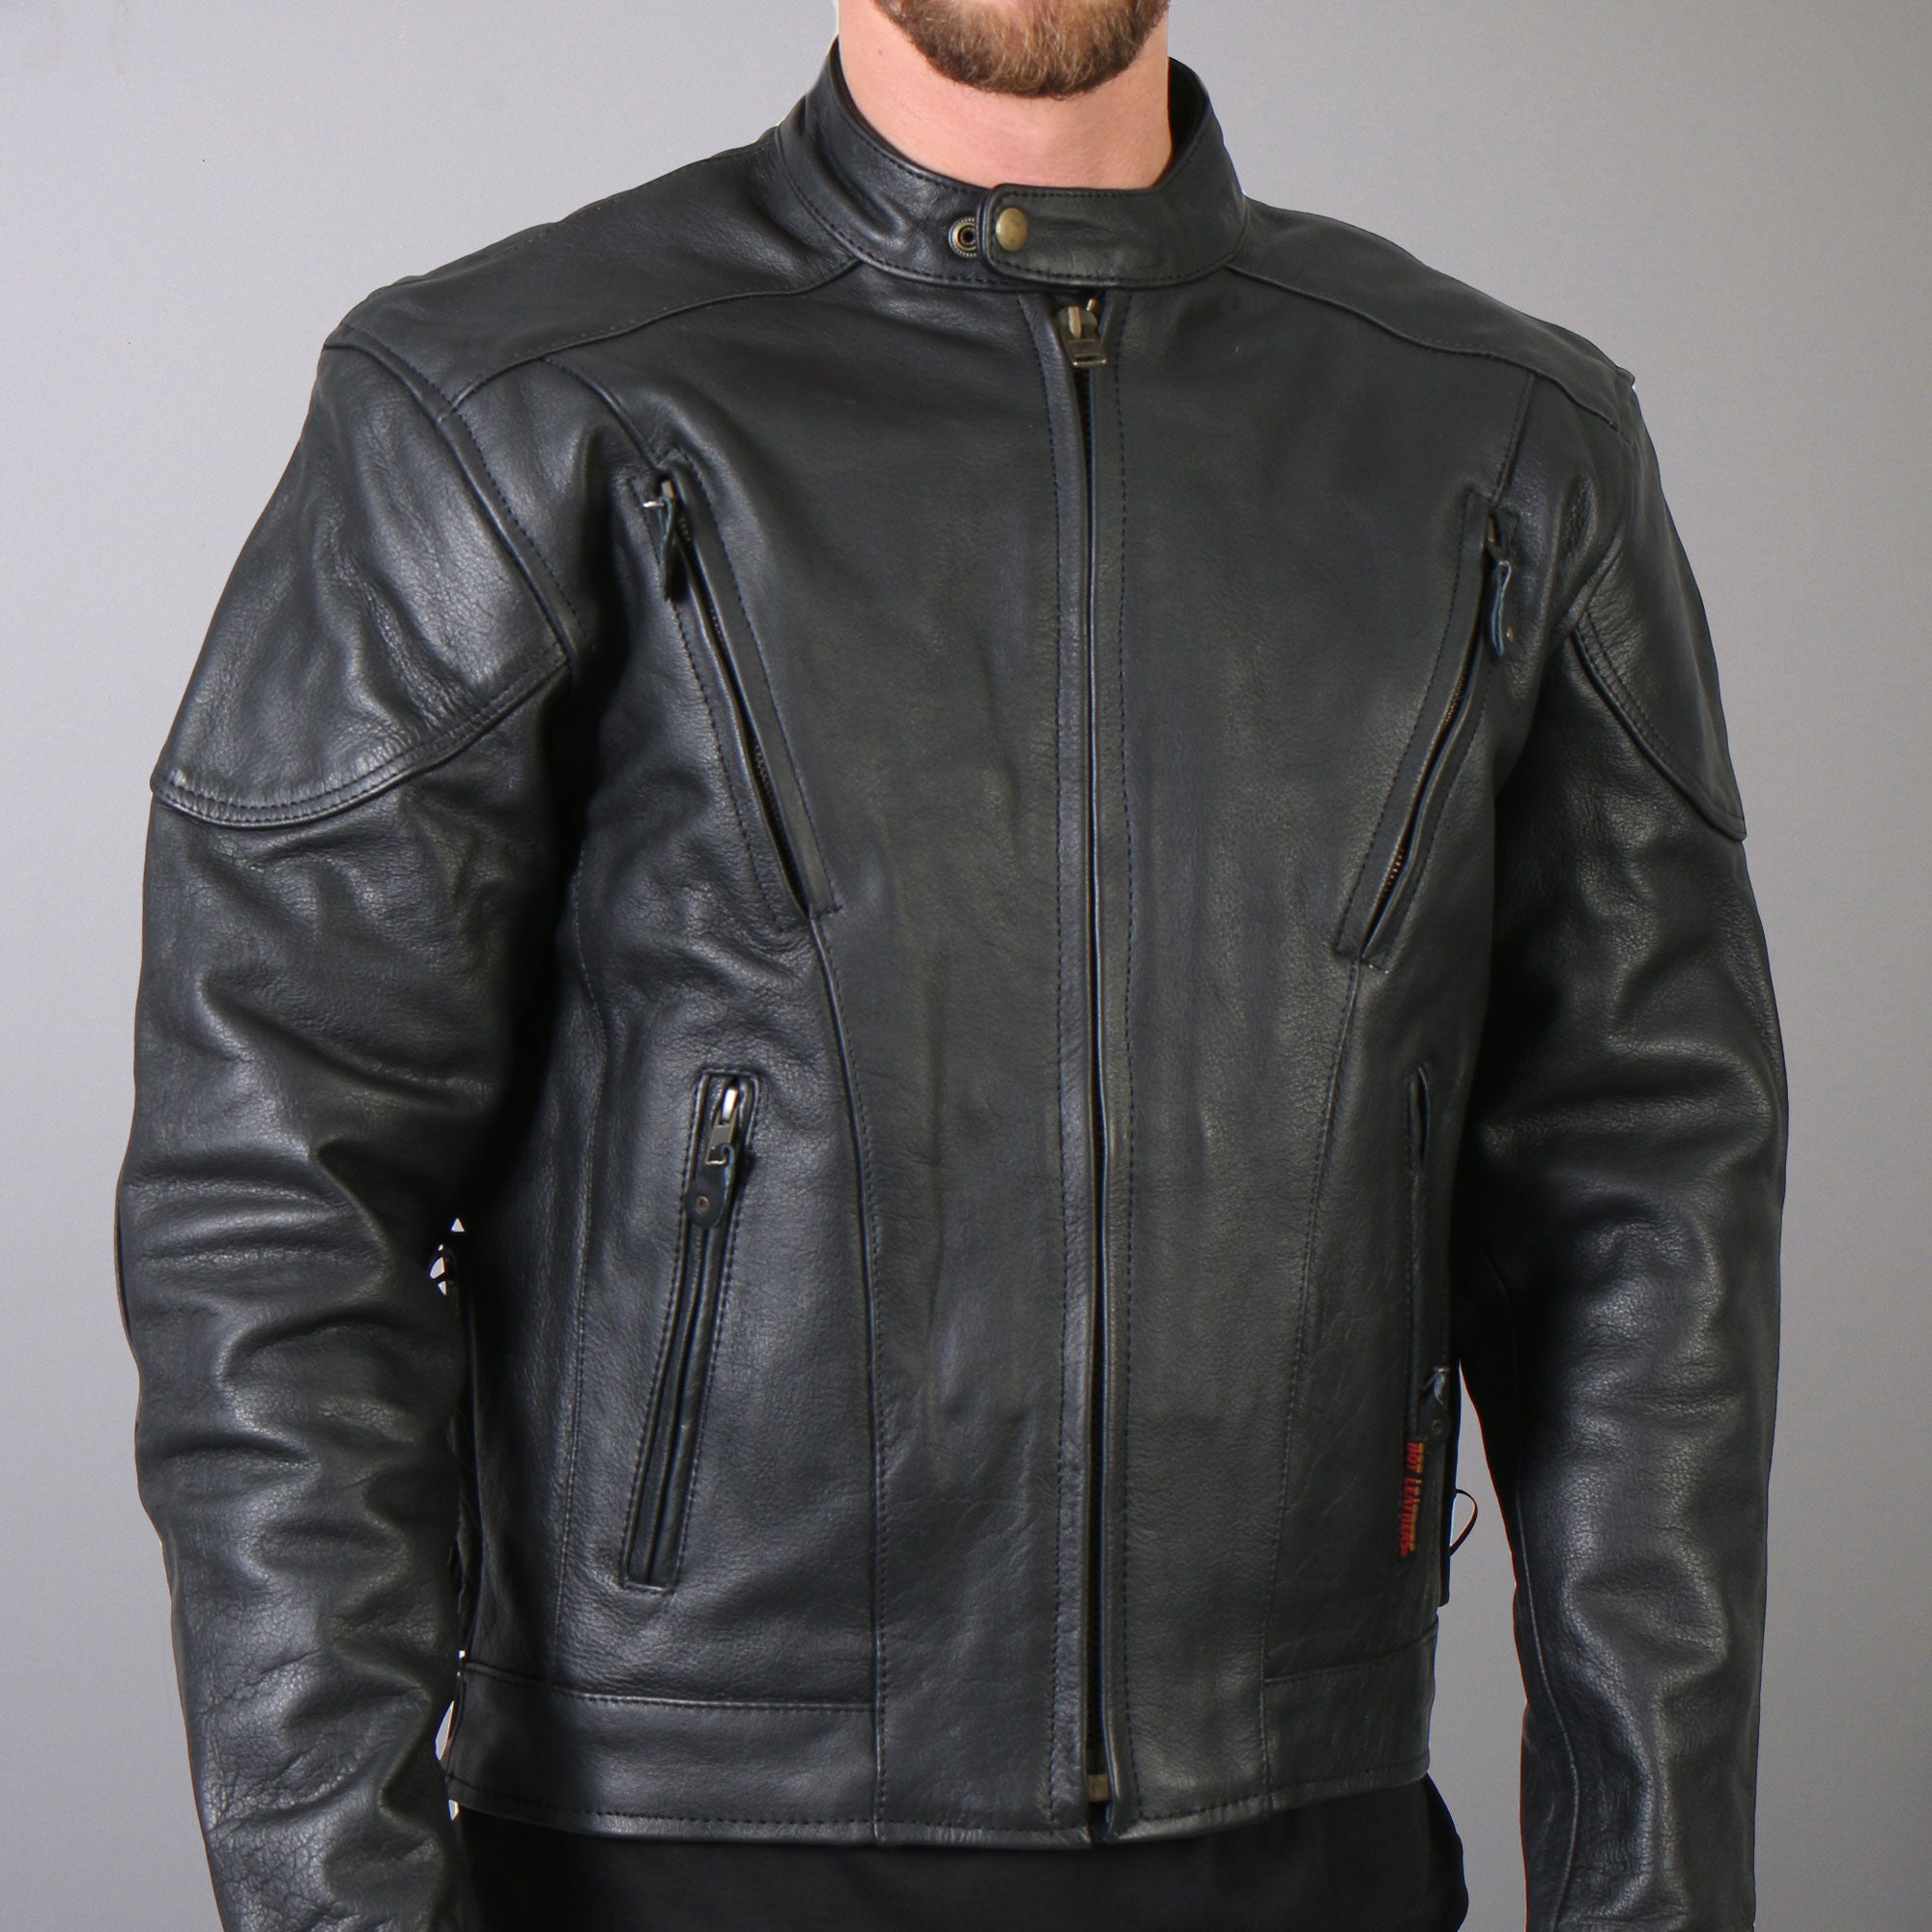 Hot Leathers Men's Vented Leather Jacket